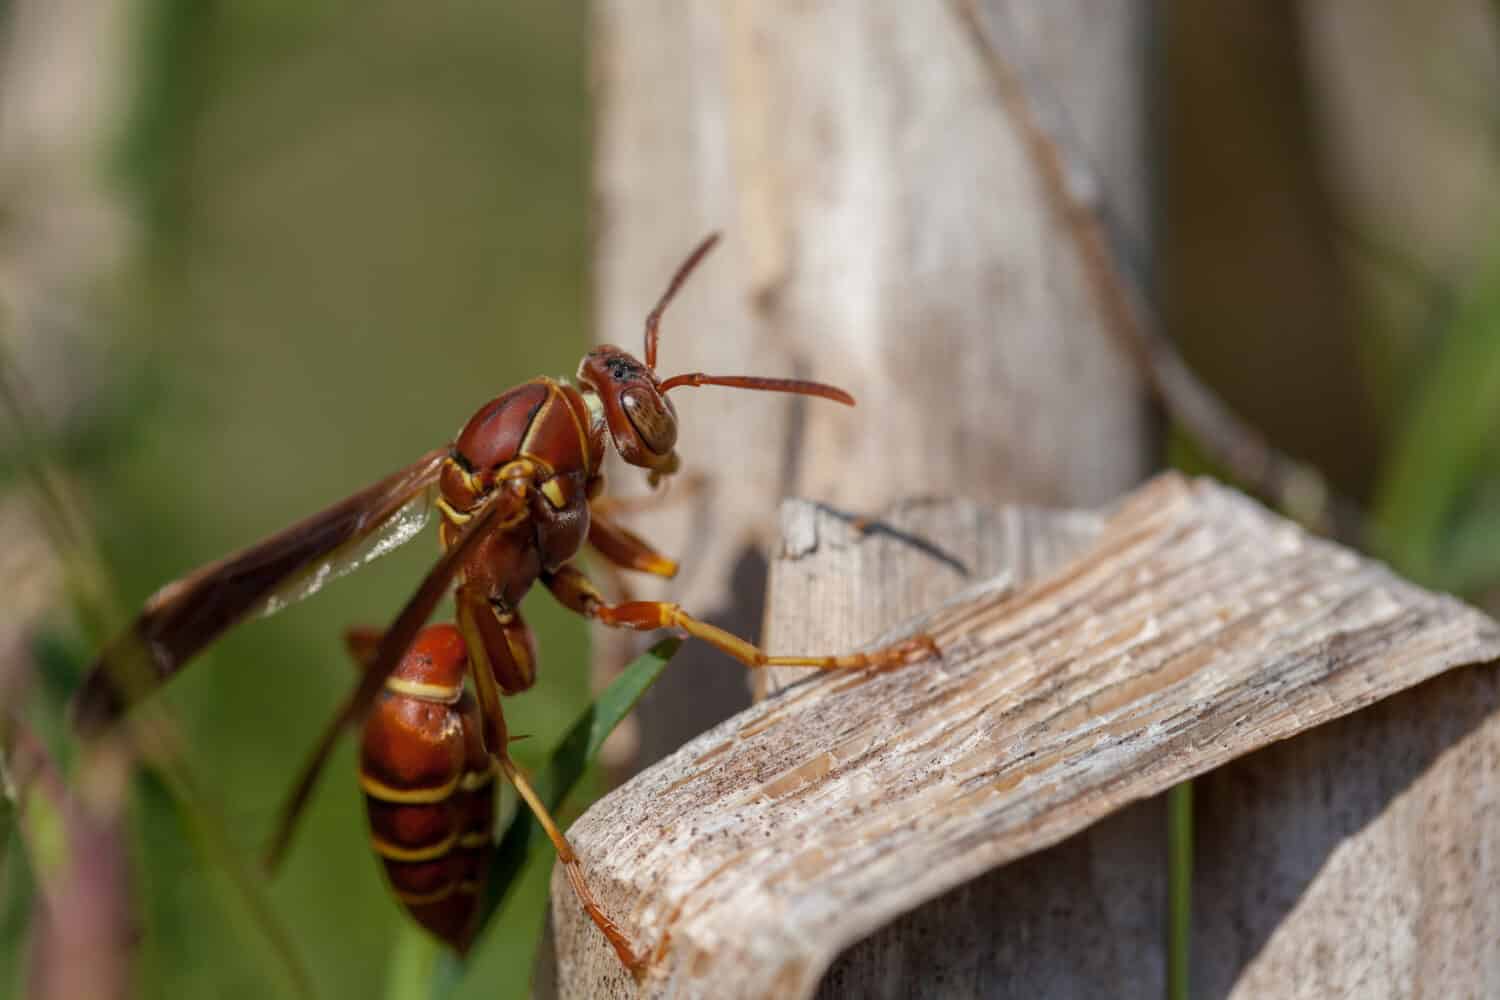 Paper wasp stings are low on the pain scale but can be fatal